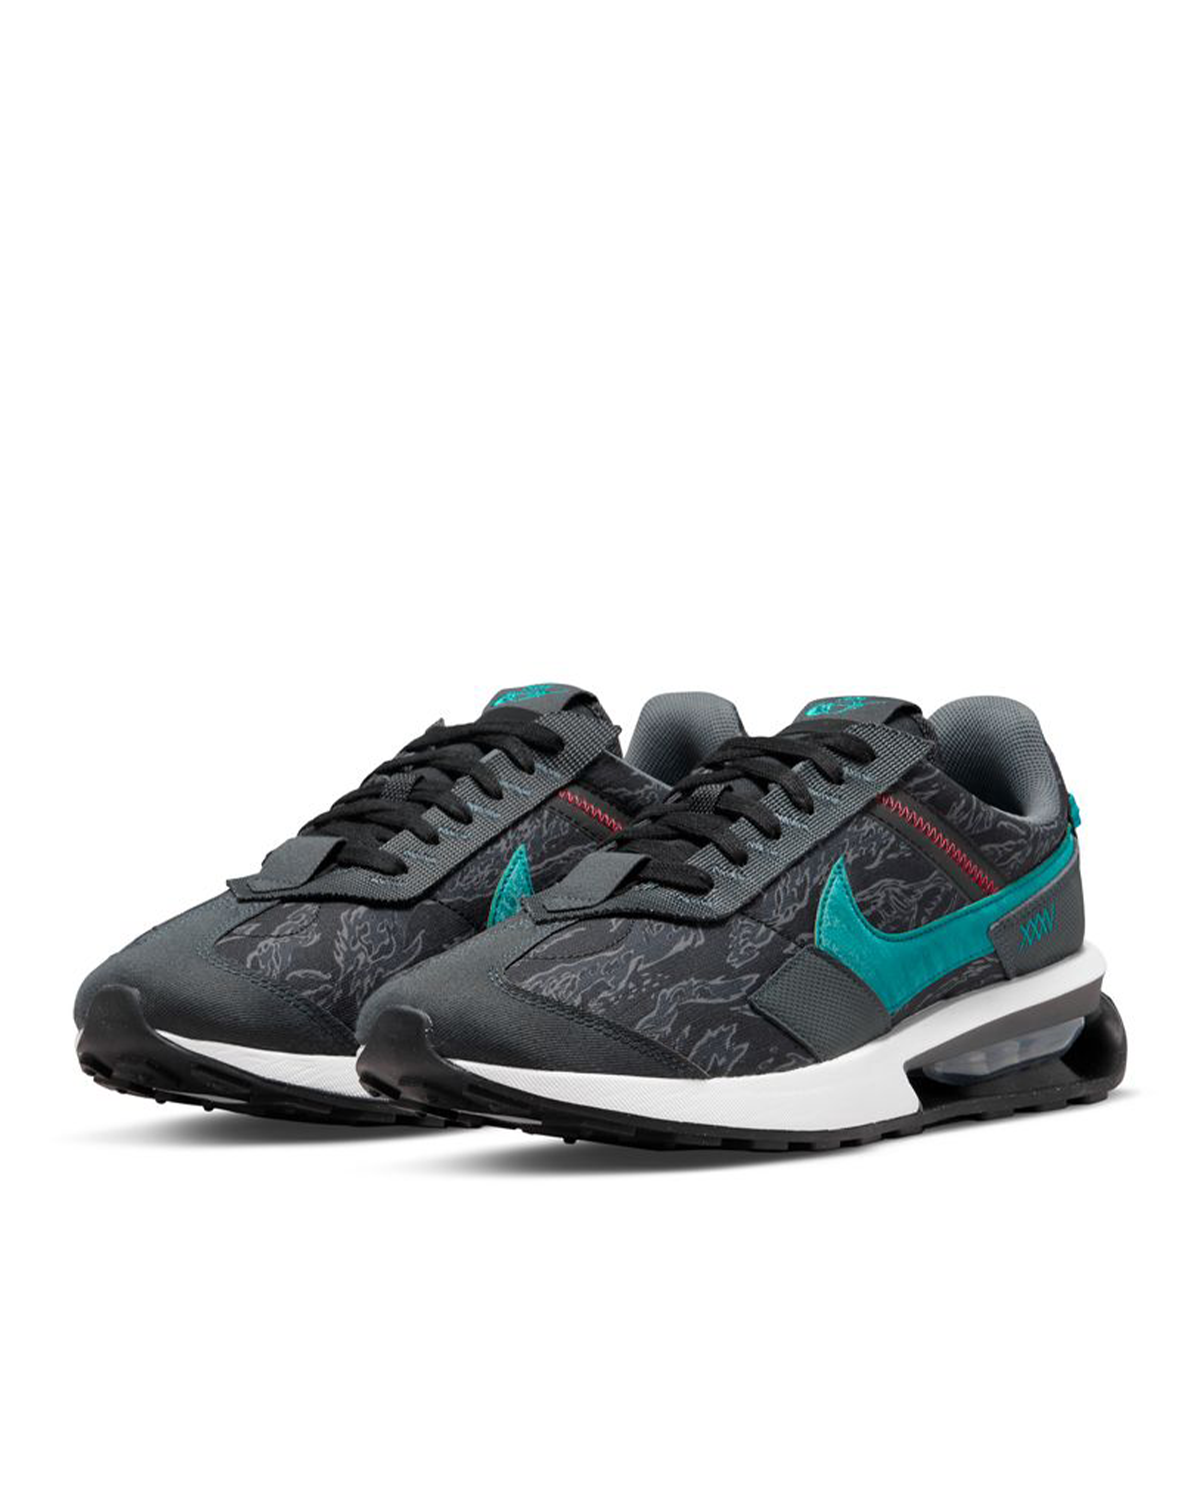 Air Max Pre-Day SE Black/Fresh Water/Anthracite